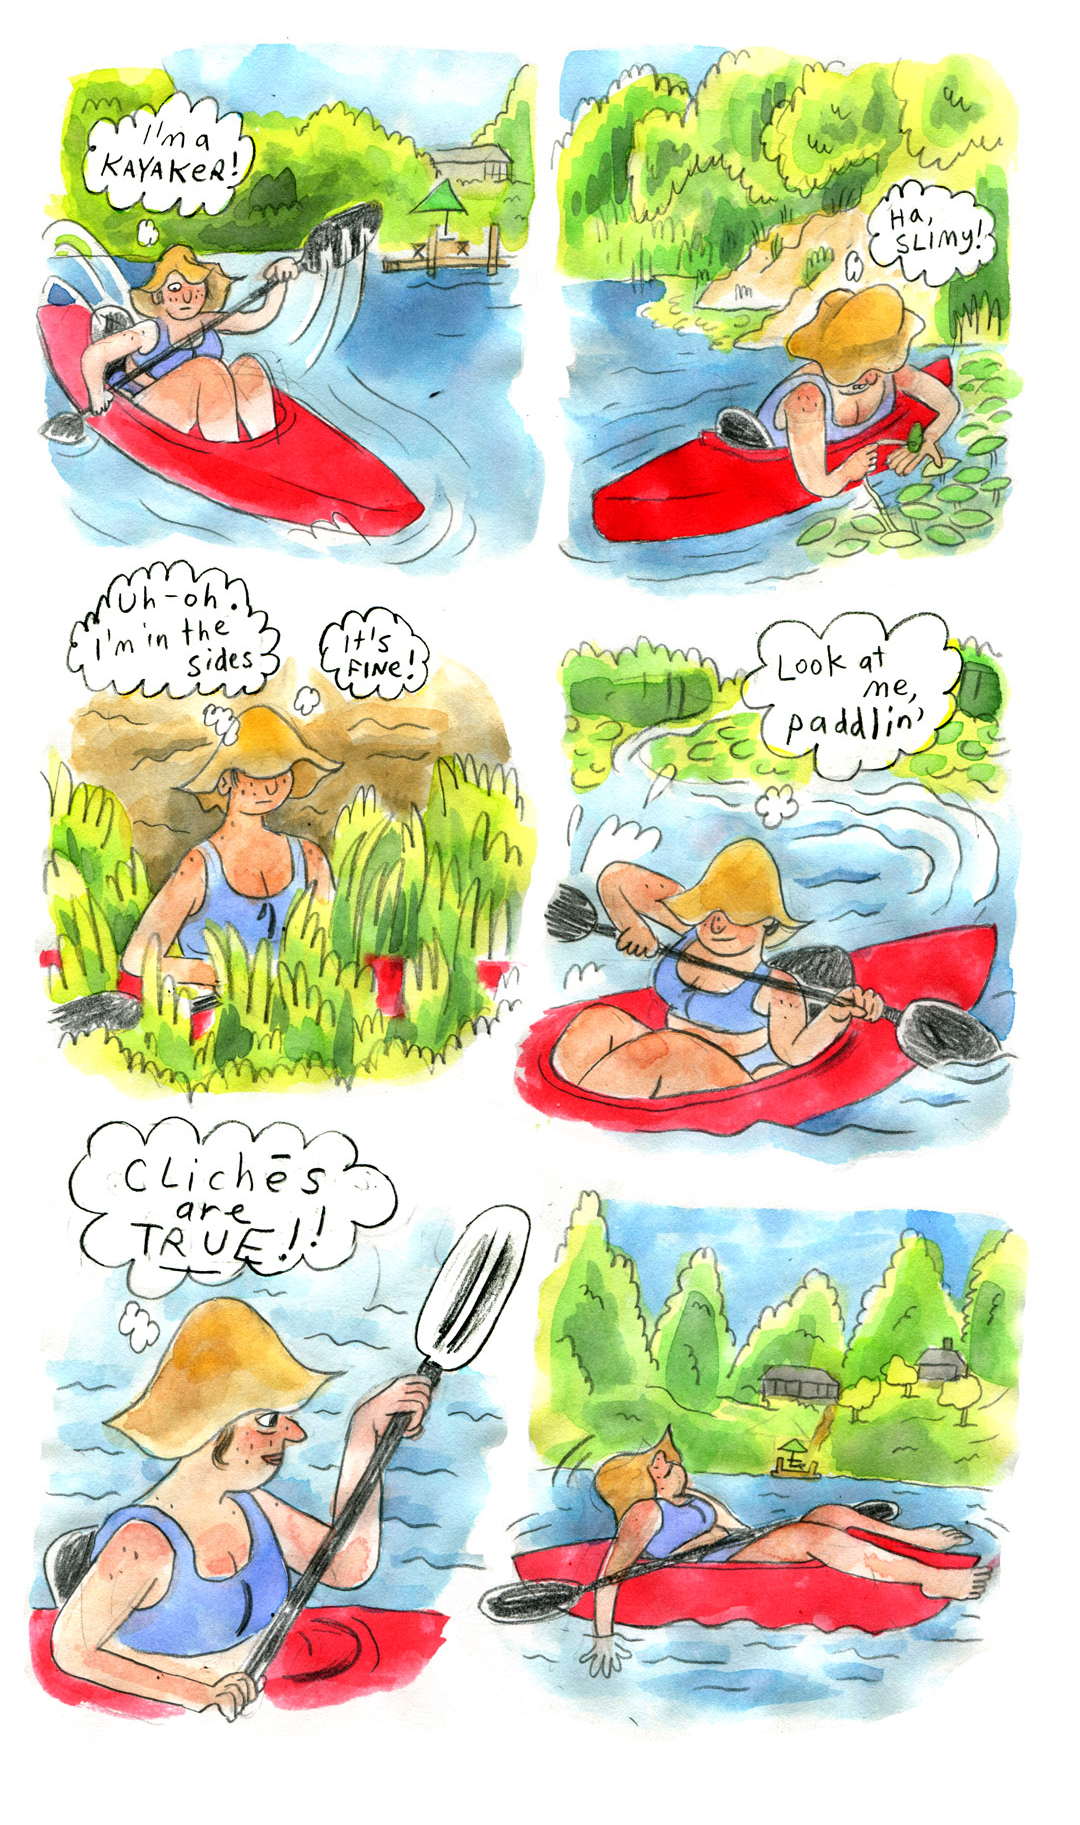 17. Vanessa now kayaks in the lake. The dock becomes small in the background. She looks down and thinks, â€œIâ€™m a kayaker!â€ She wears a serious expression.
18. Paddle tucked away, Vanessa looks down at a clump of lily pads and holds one in her hand. She thinks, â€œHa, slimy!â€ 
19. Vanessa now sits straight up in her kayak, which is surrounded by a bed of green reed plants. Her floppy hat covers her eyes. She looks tense as she thinks, â€œUh-oh. Iâ€™m in the sides. Itâ€™s fine!â€
20. Vanessa is back in motion, paddling confidently and smiling as she puts distance between herself and the marshy sides of the lake. She thinks, â€œLook at me, paddlinâ€™â€
21. Vanessa, still paddling, smiles and thinks, â€œCliches are true!!â€
22. Vanessa is in a beautiful lake scene, with the evergreen trees, dock, and little houses in the background. She lies back in her kayak, floppy hat covering her eyes and paddle resting on the kayak. She dips her hand in the water and smiles contentedly. 